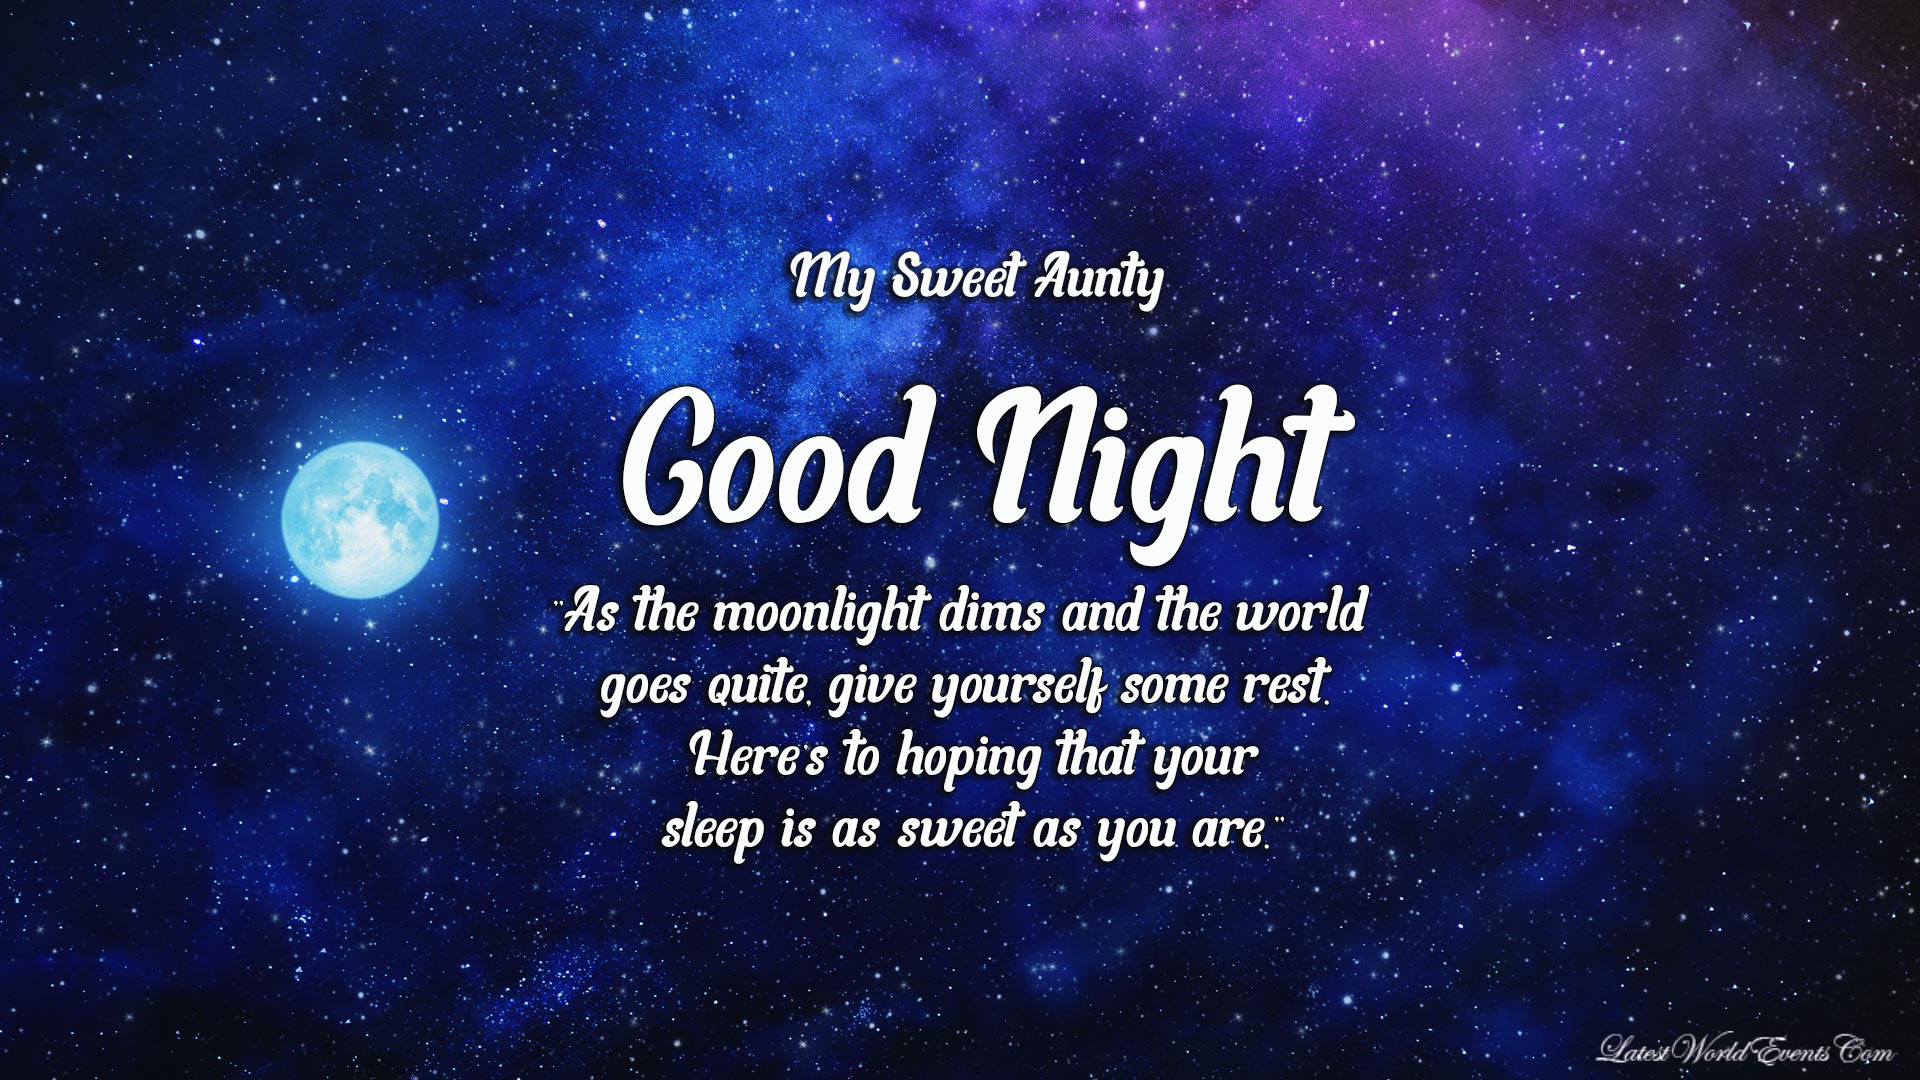 Good Night Messages for Aunt & Good Night Wishes